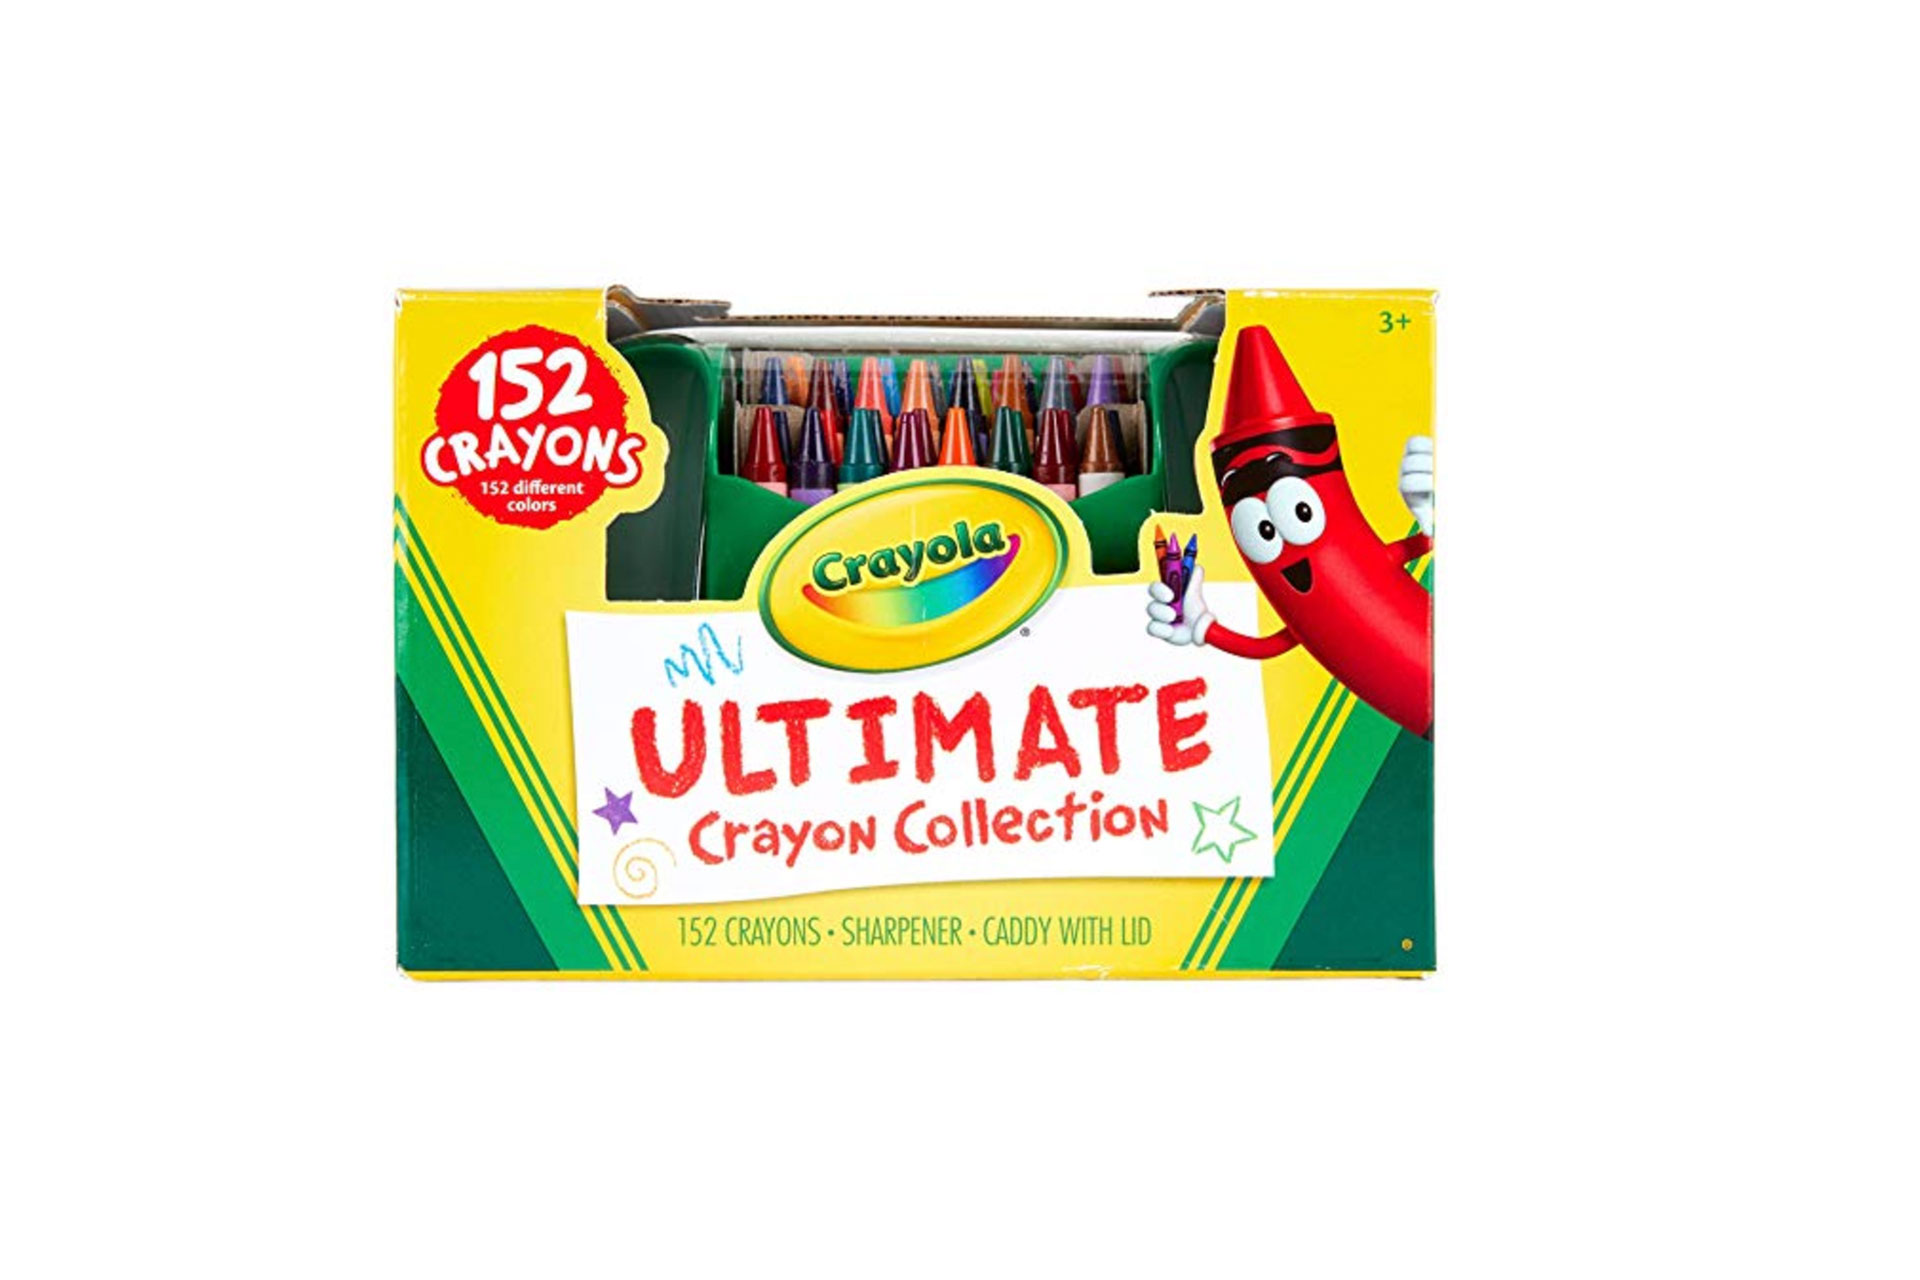 Ultimate Crayon Collection; Courtesy of Amazon